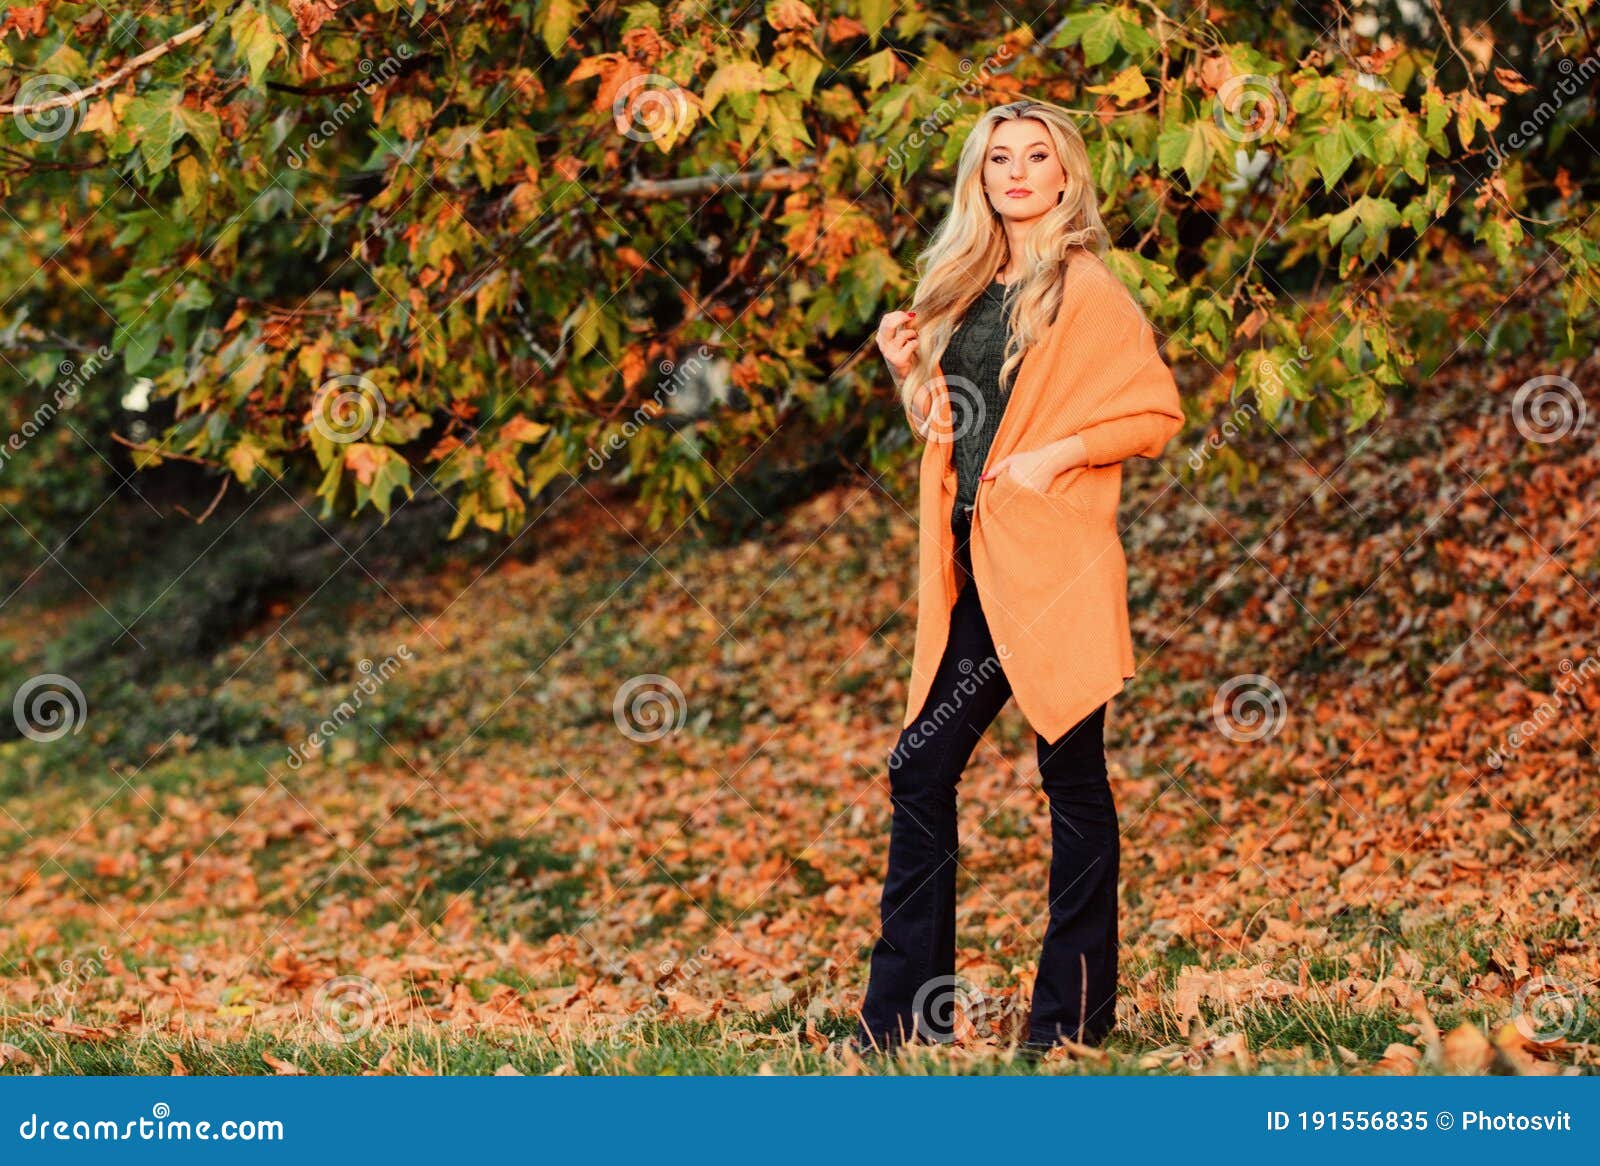 Cozy and Comfortable. Cozy Outfit Ideas for Weekend Stock Image - Image ...